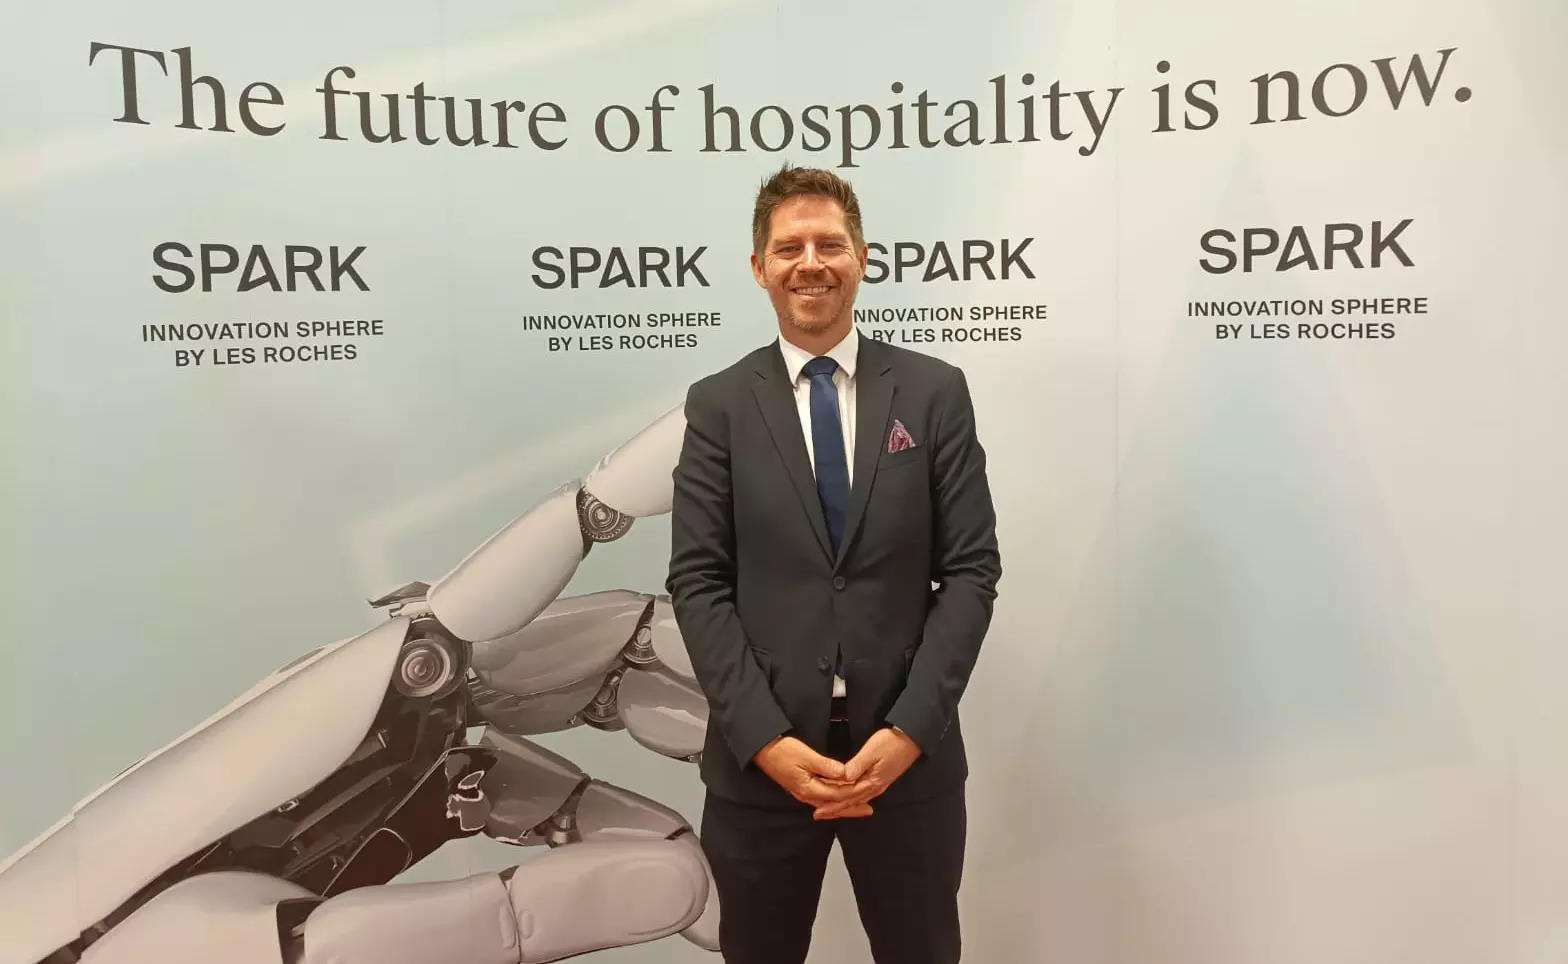     Pablo García, Director of Global Project Spark at Les Roches School of Global Hospitality.